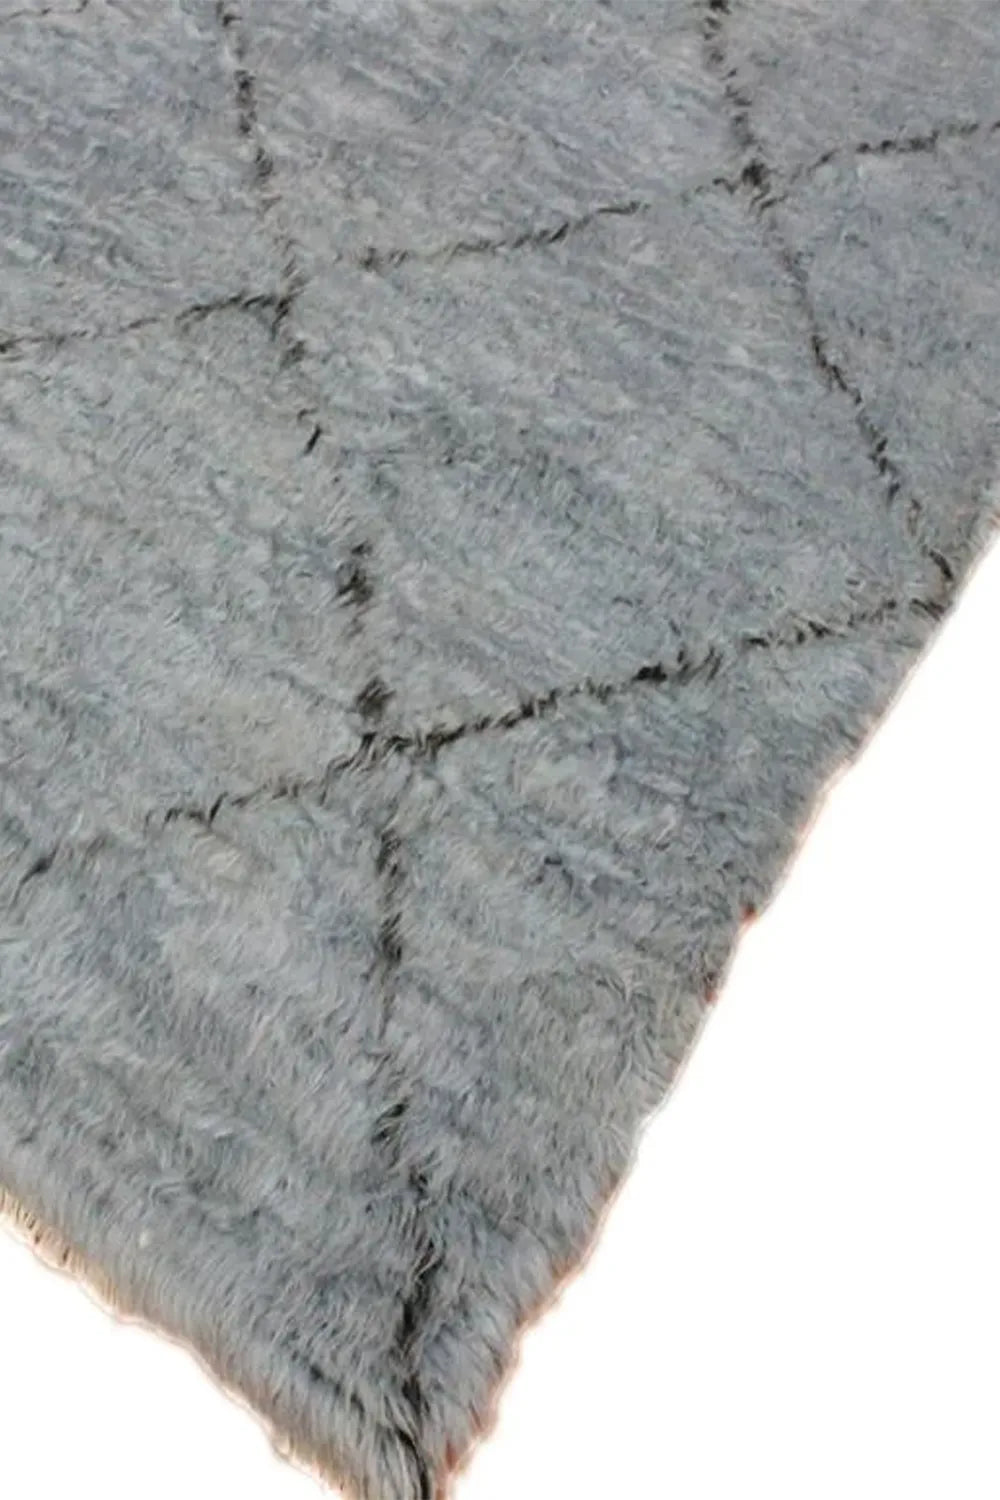 High-quality gray wool shag area rug, combining style and comfort.